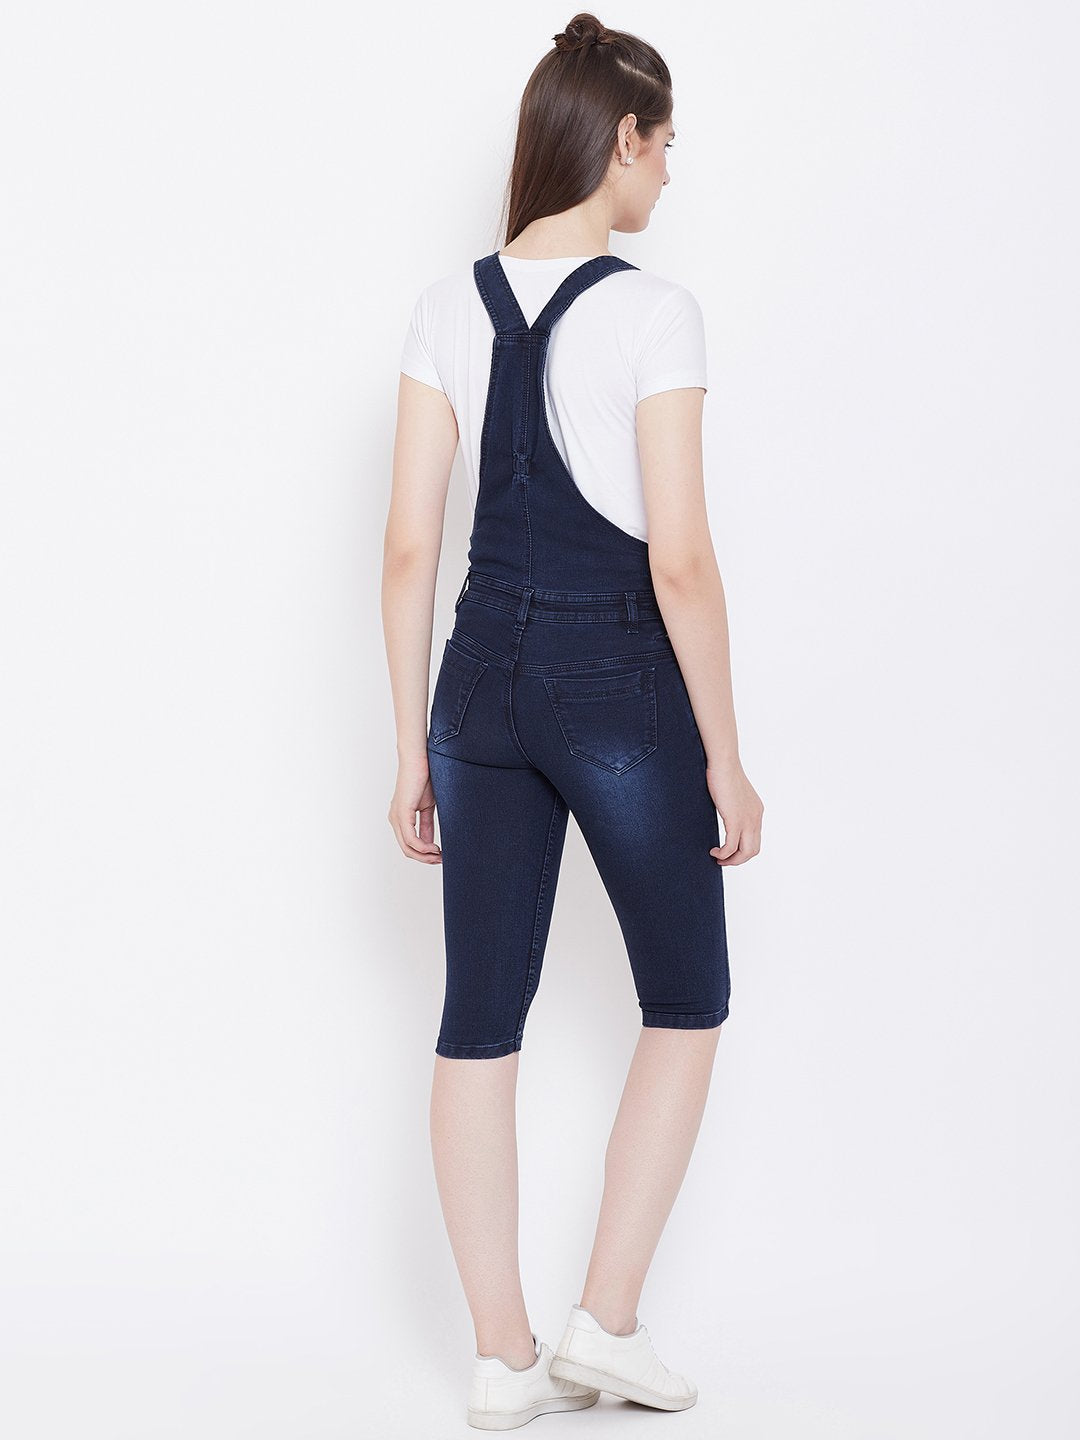 Stretchable Blue Capri Dungarees - NiftyJeans